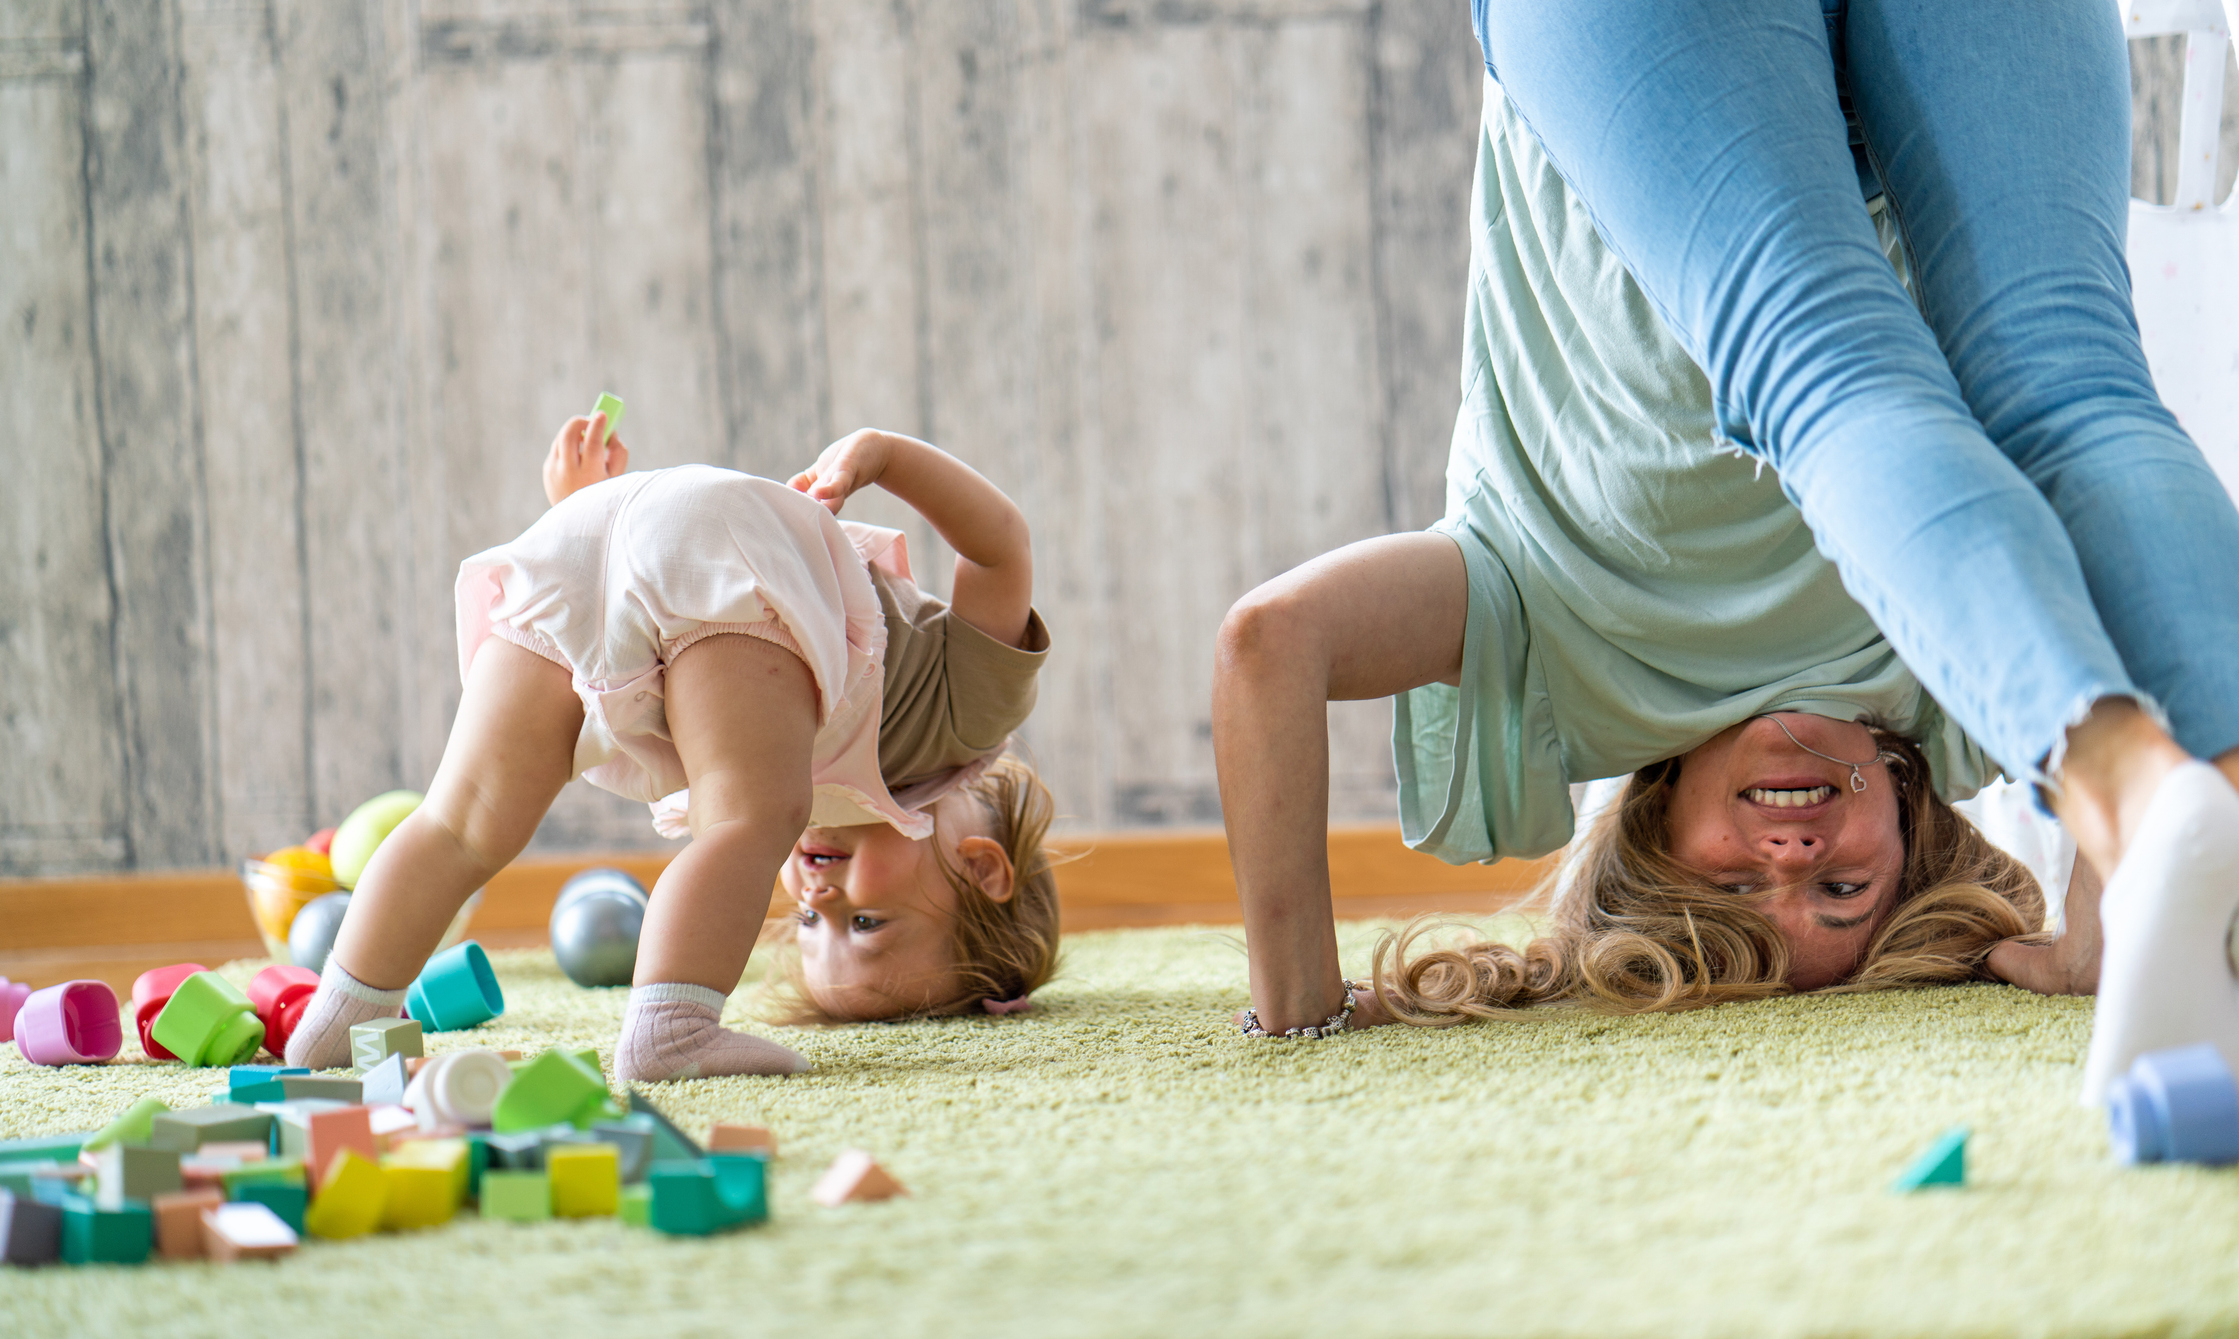 Adult and child playfully upside down indoors with toys scattered around